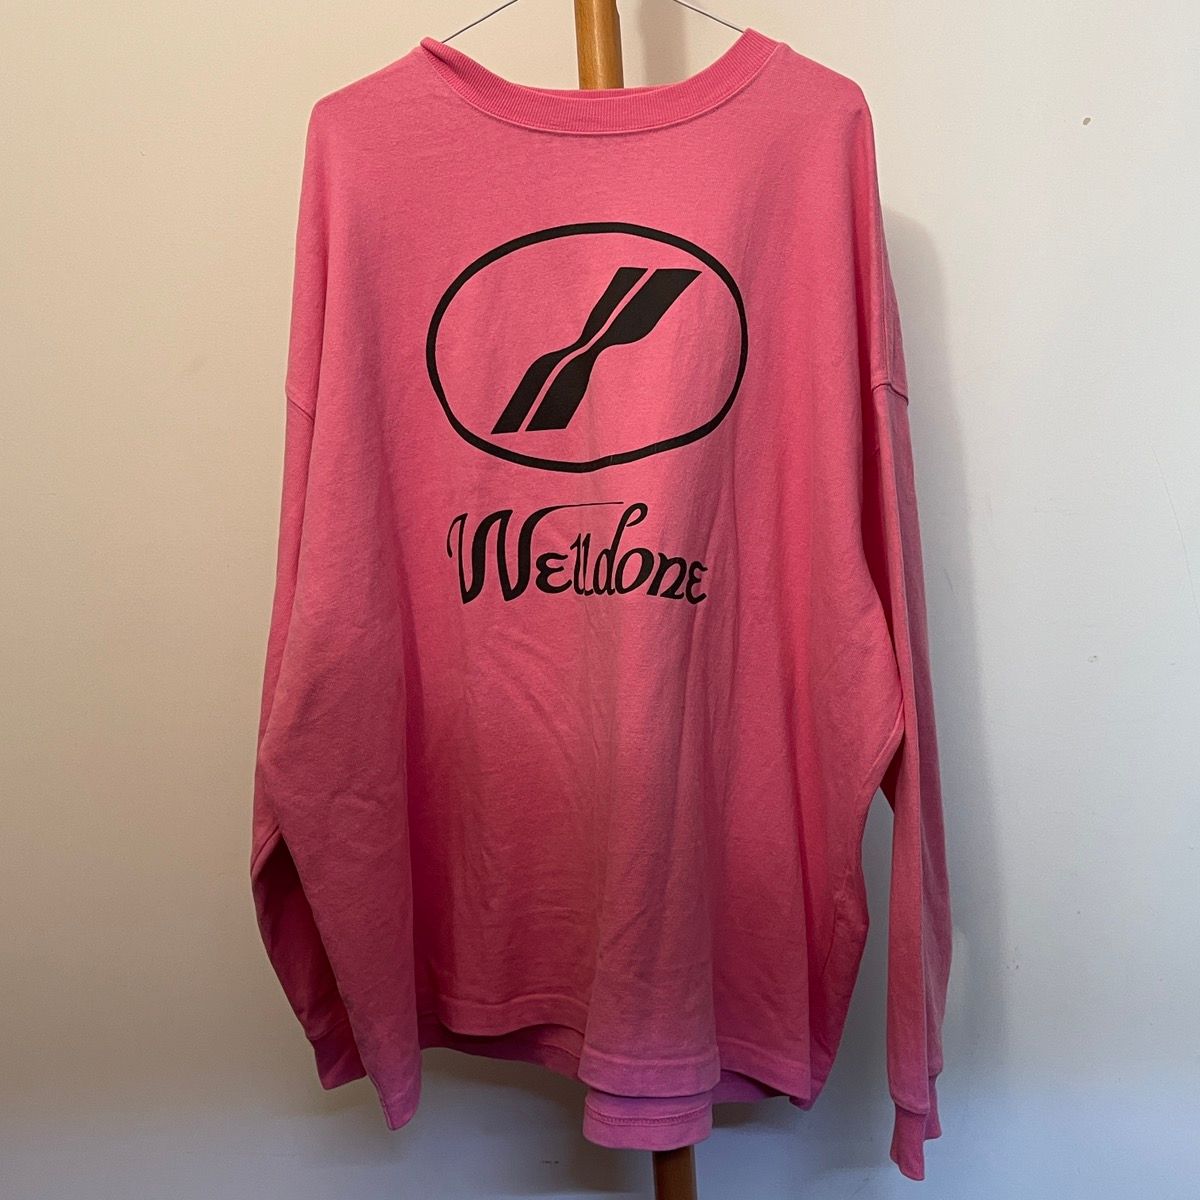 WE11DONE We11done welldone pink logo print long sleeve shirt one size Size ONE SIZE - 1 Preview